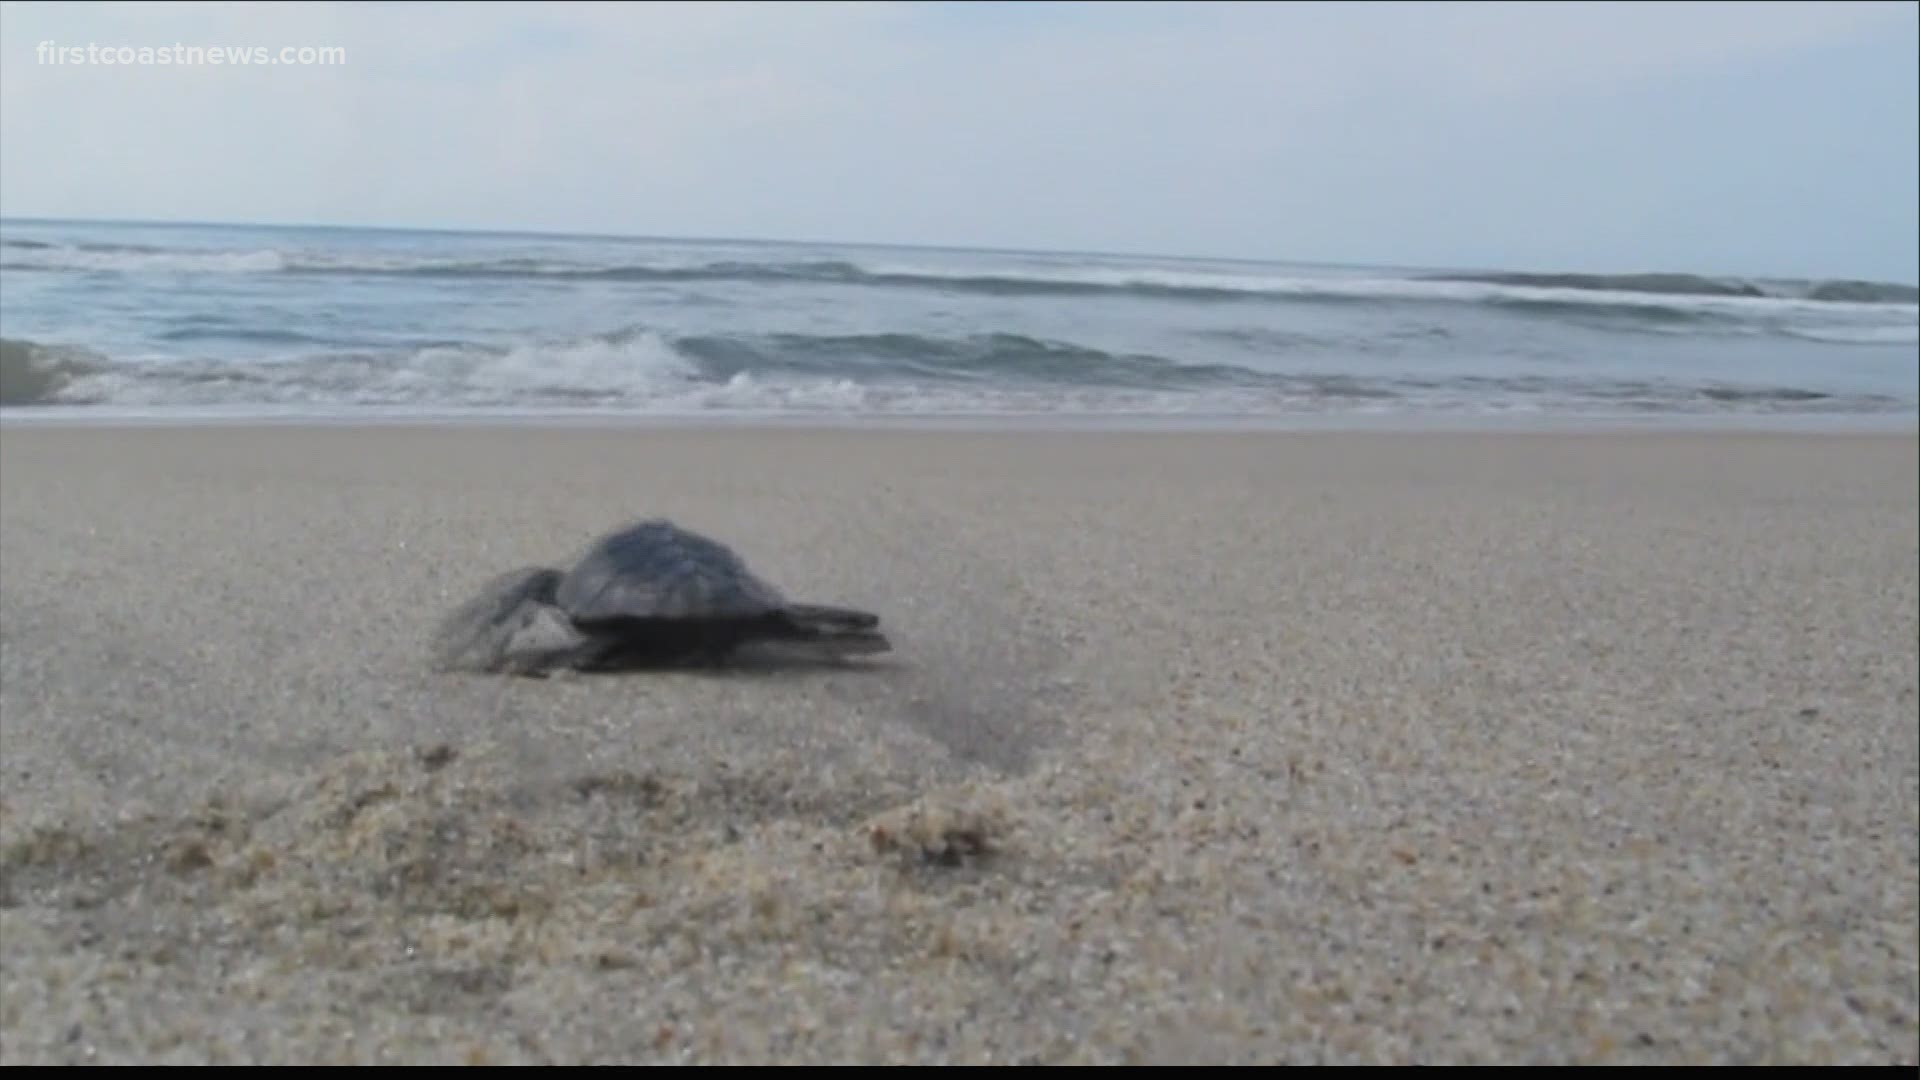 Marine biologists working to help young turtles are finding plastic in the digestive tracts of the animals.